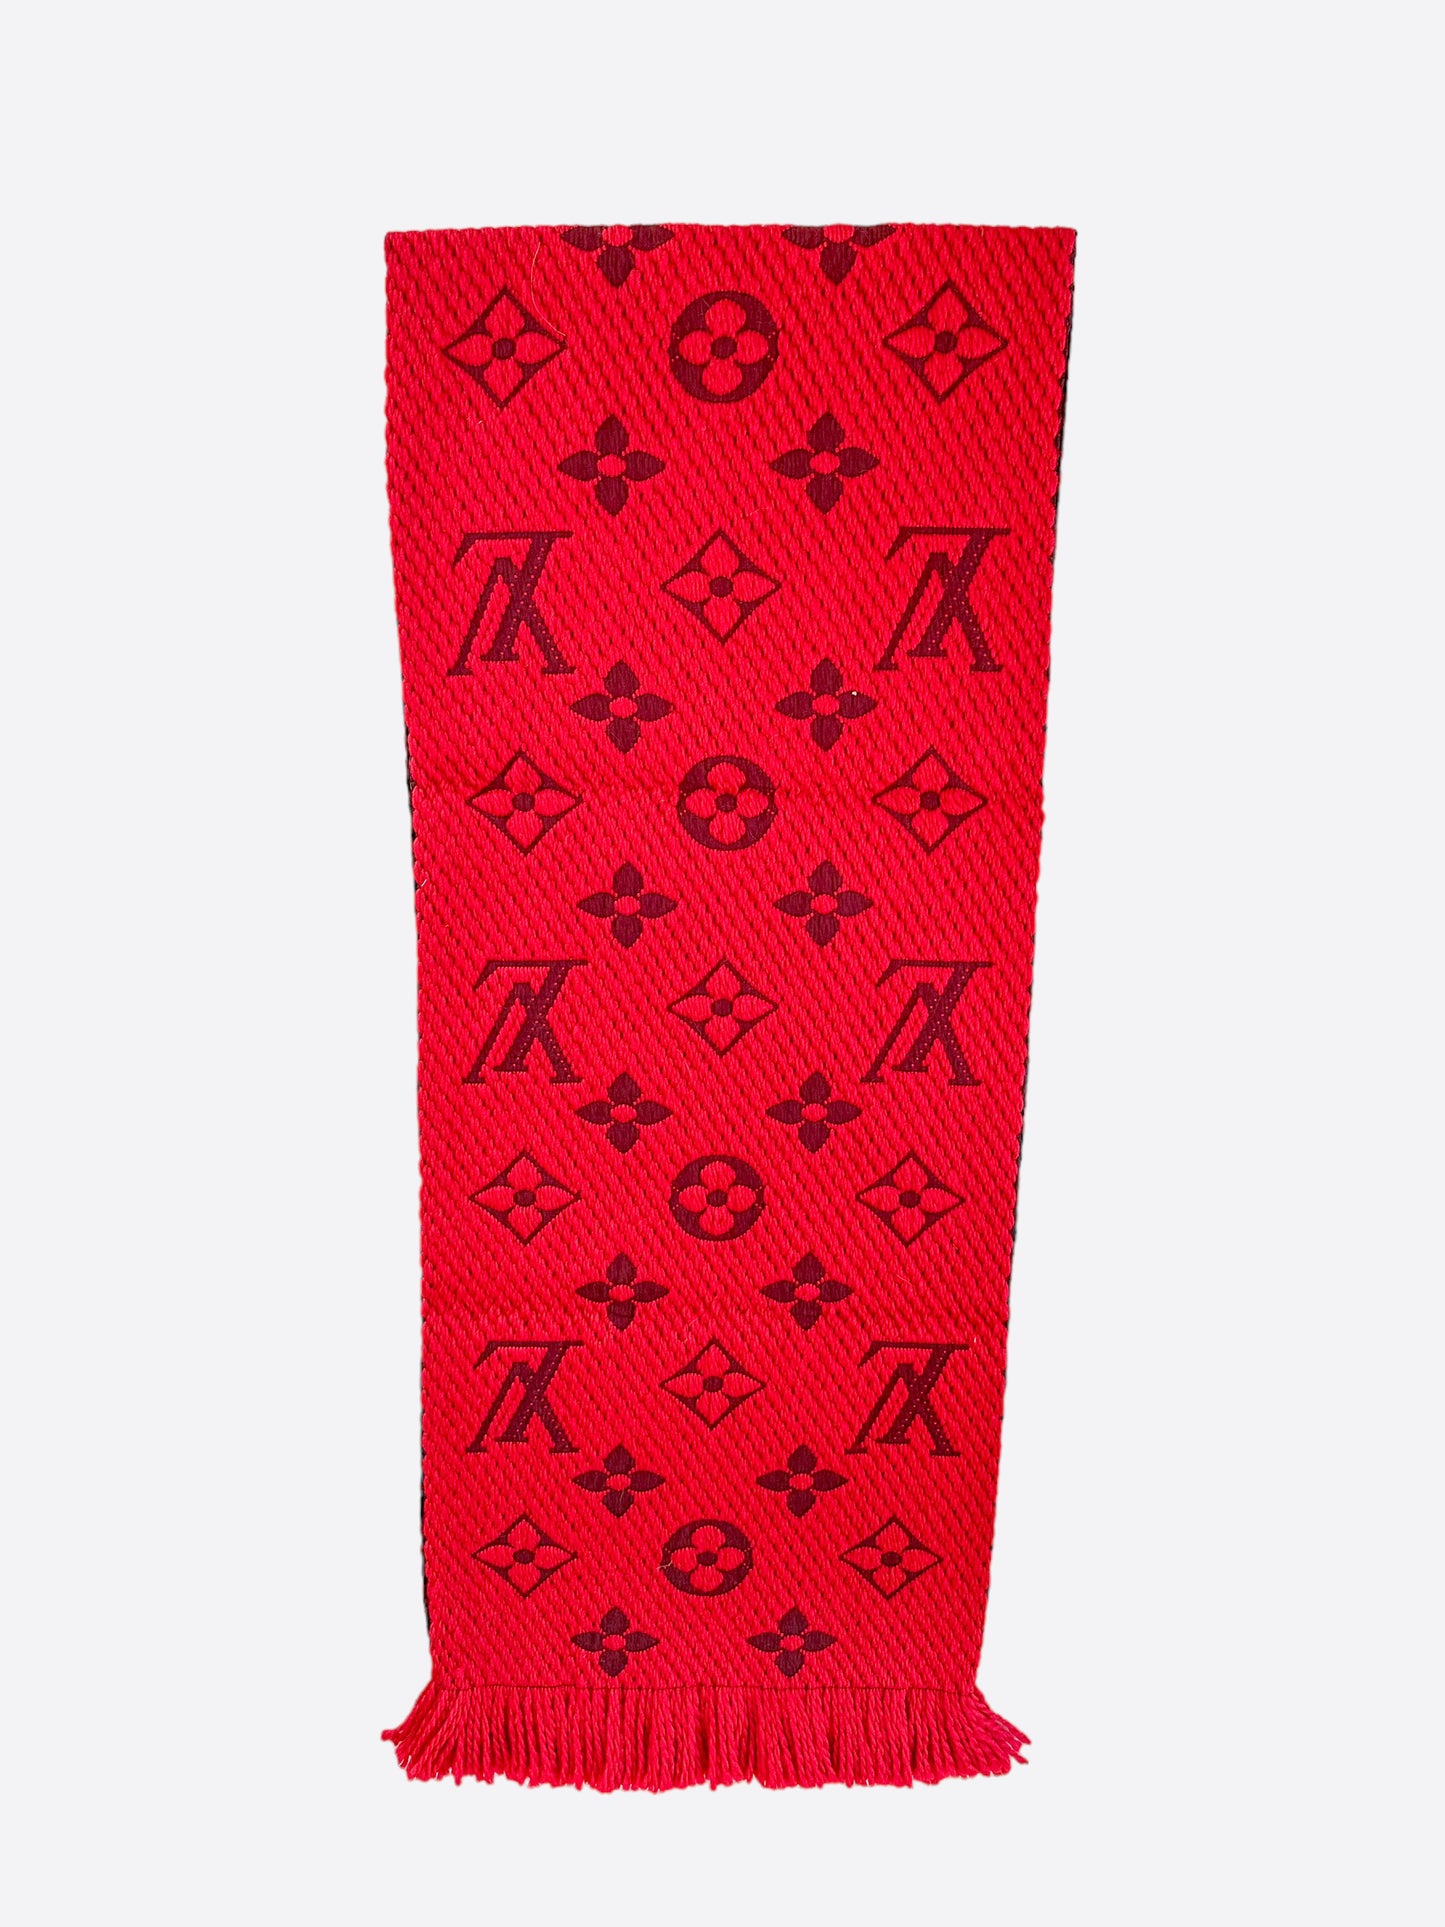 Louis Vuitton Monogram Logomania Scarf, Red, * Inventory Confirmation Required